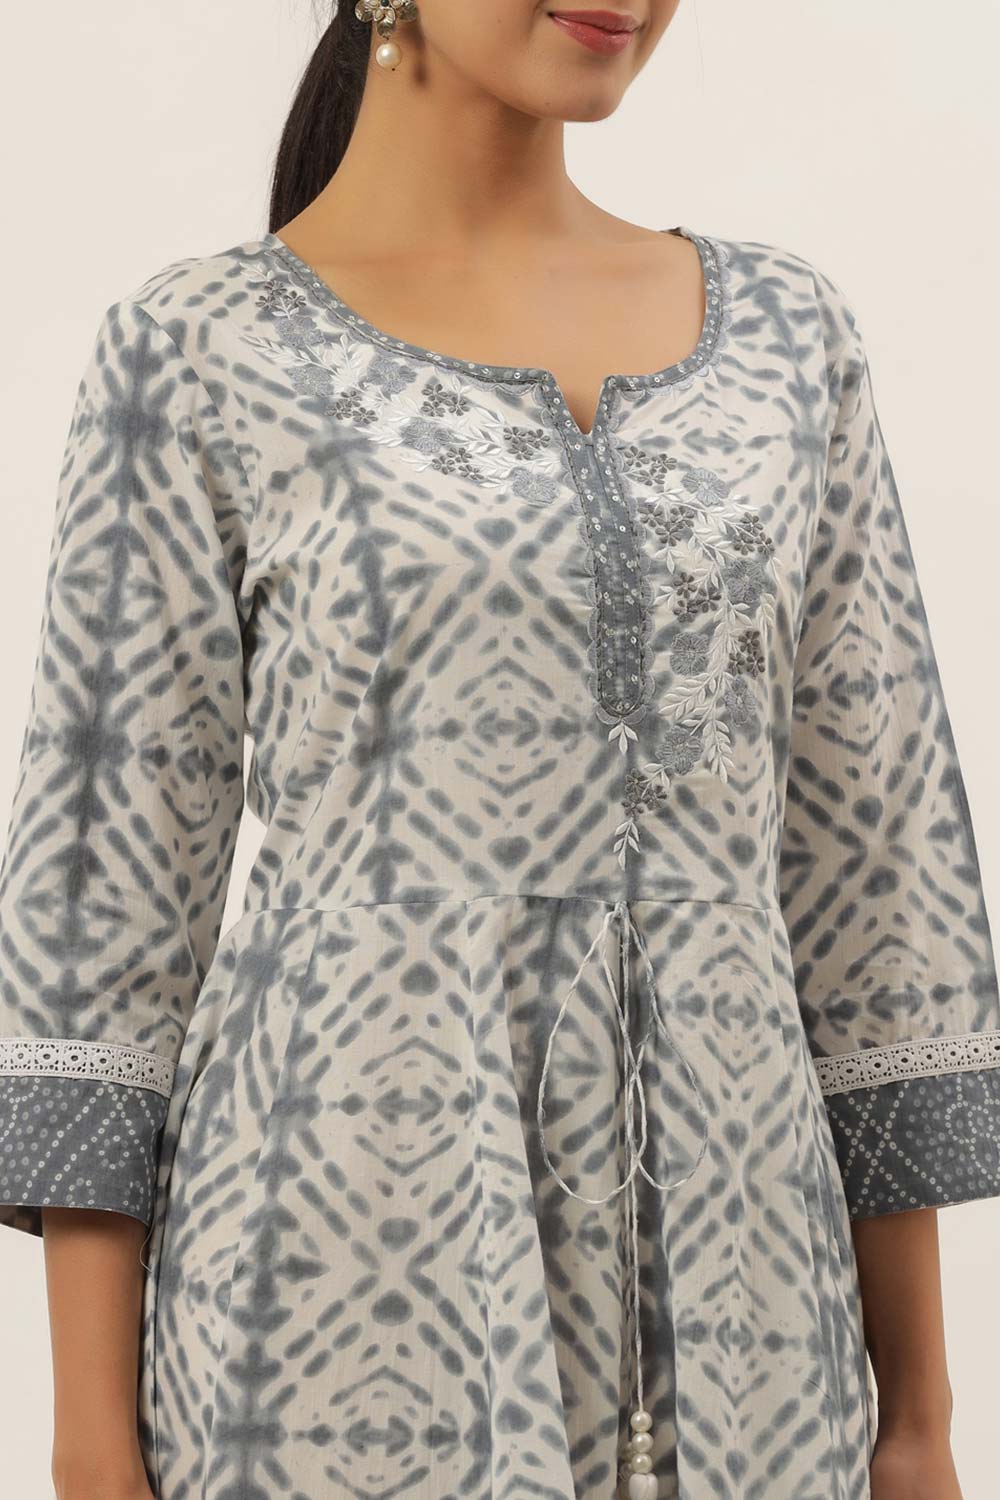 Grey Pure Cotton Embroidered Dress